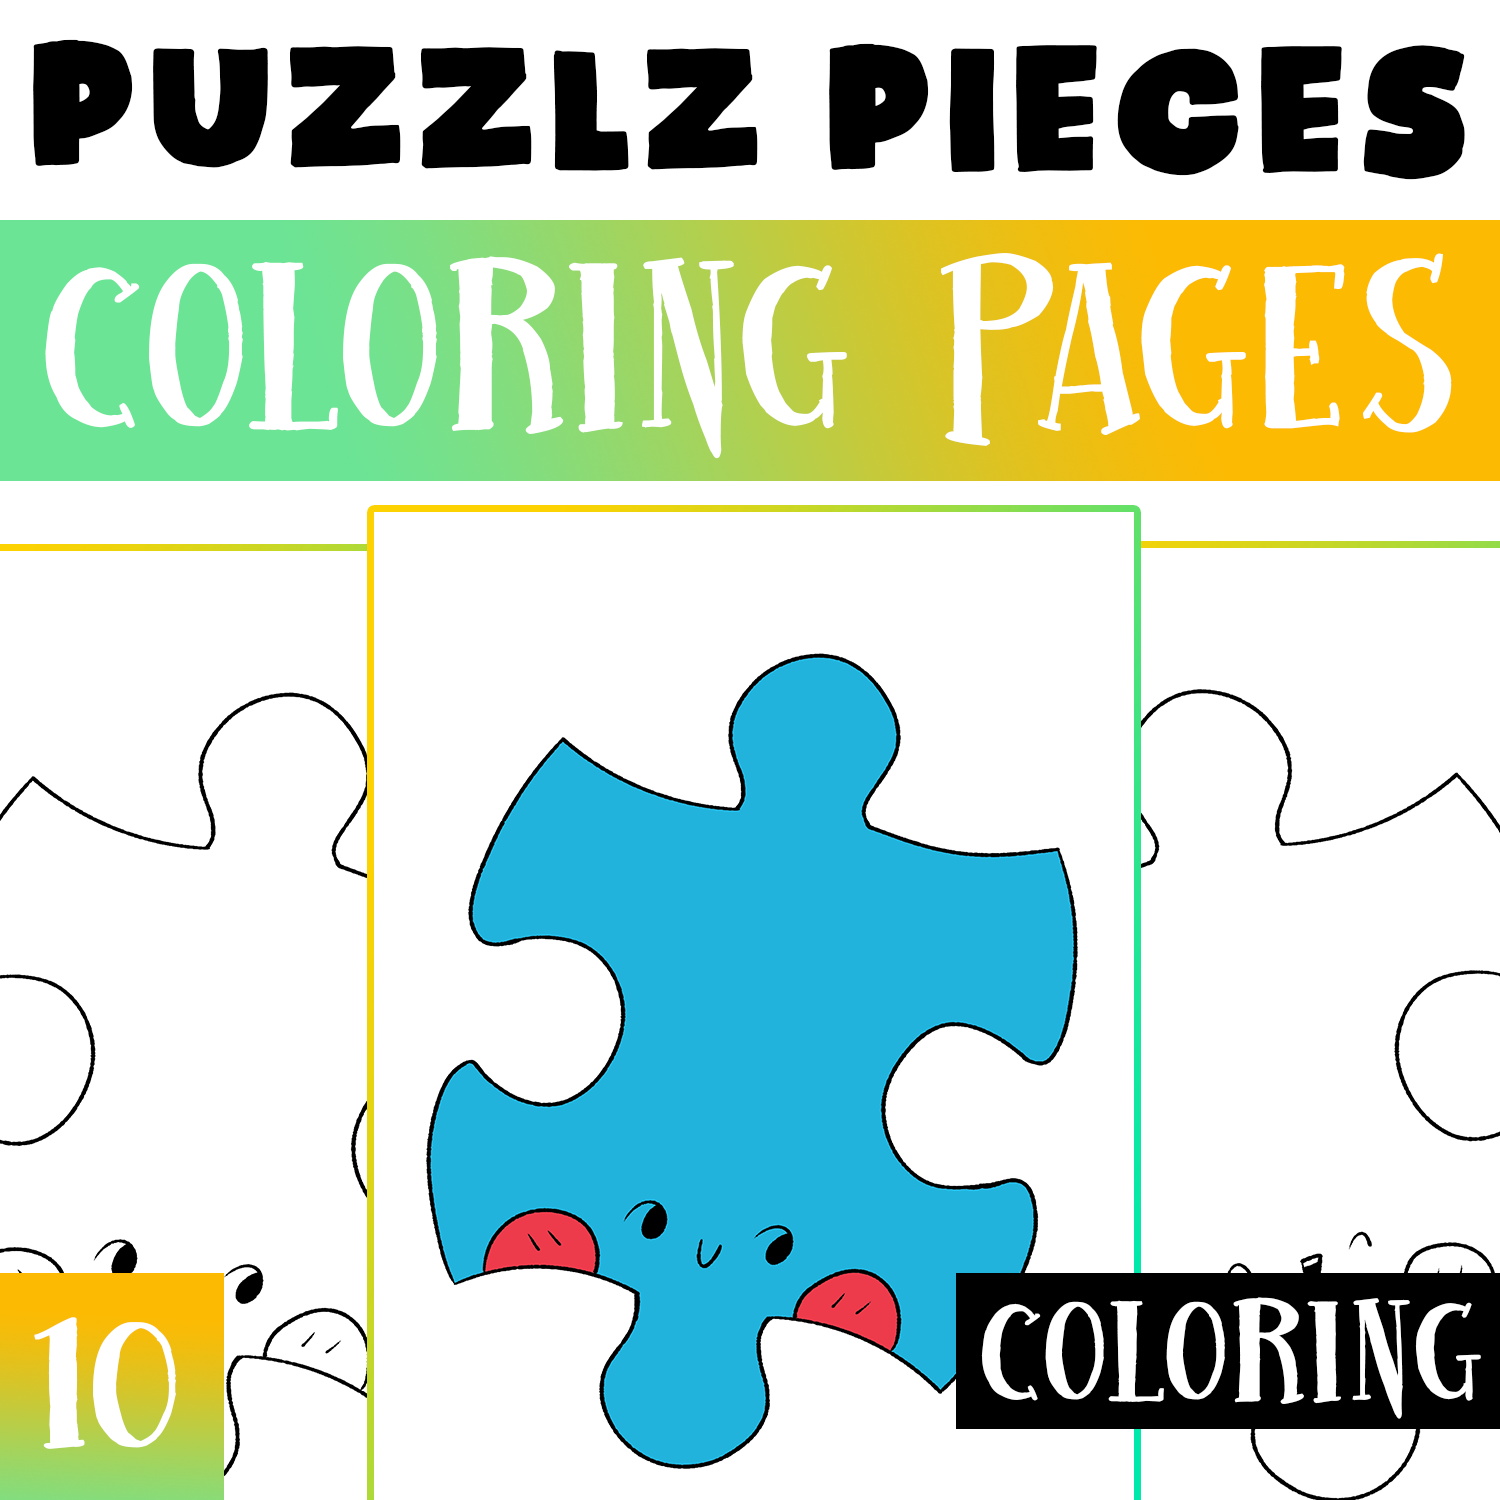 Puzzle pieces coloring pages worksheet activities autism awareness morning work made by teachers